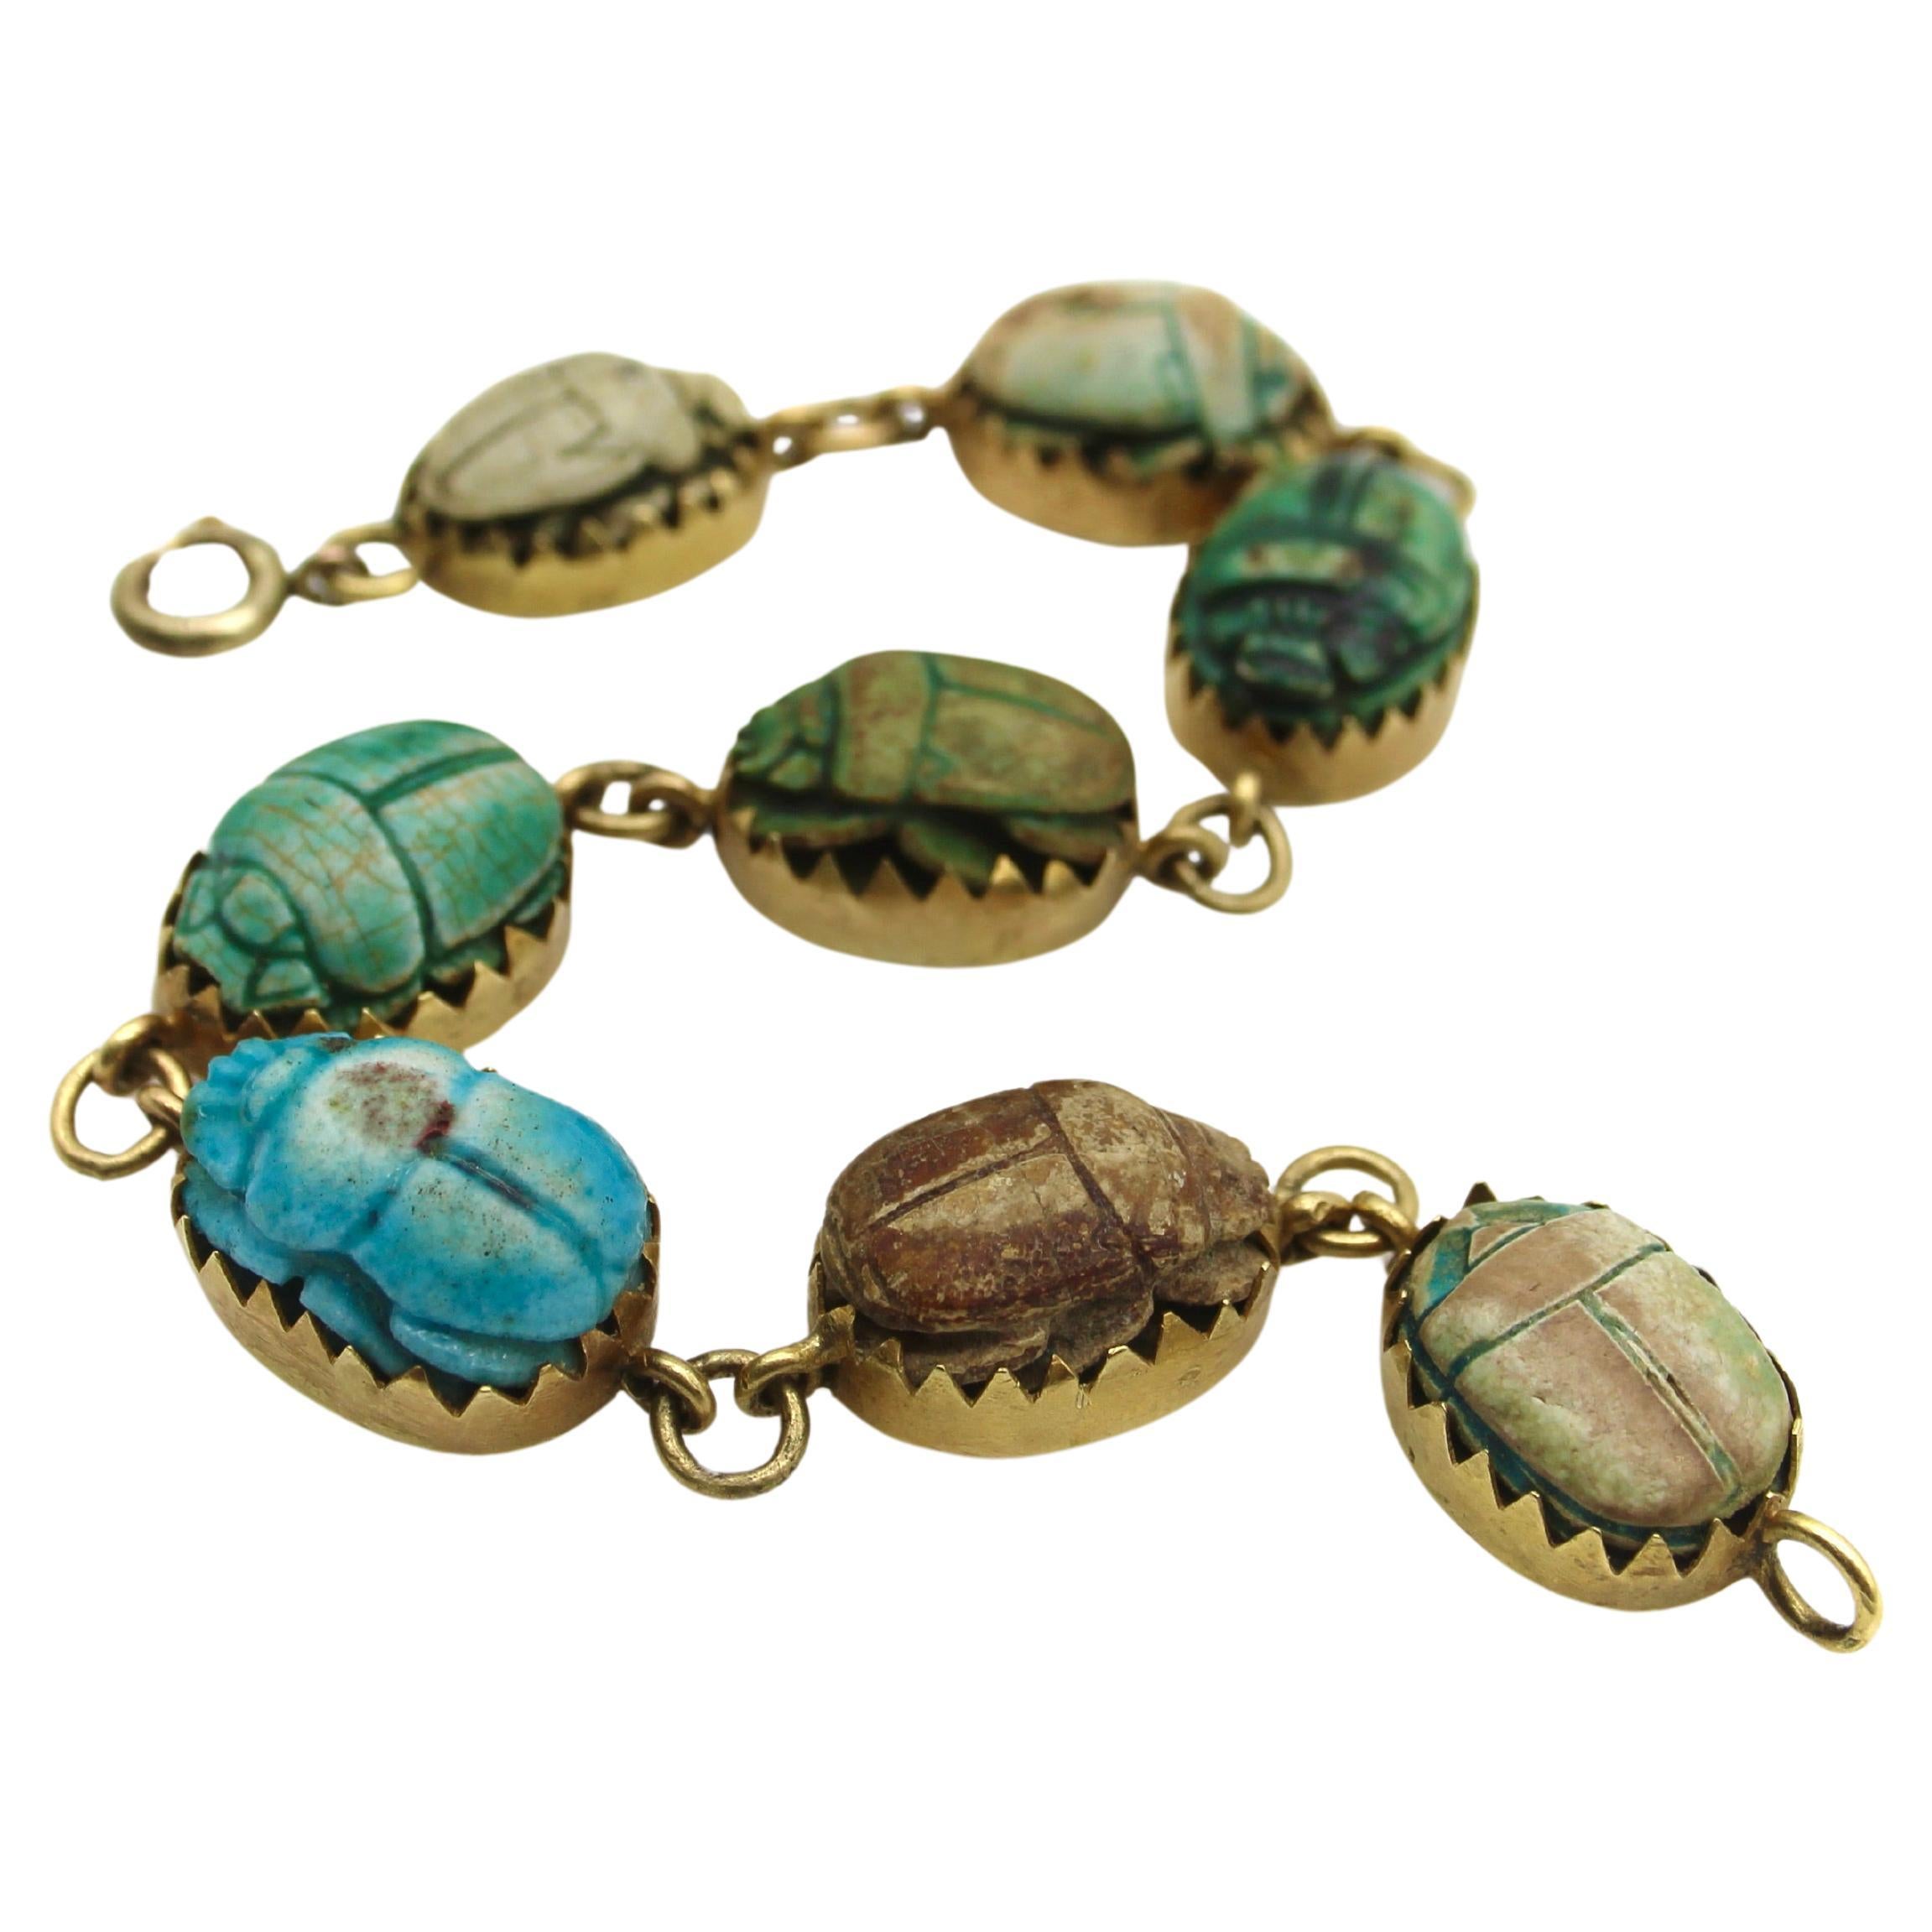 What is the meaning of a scarab bracelet?